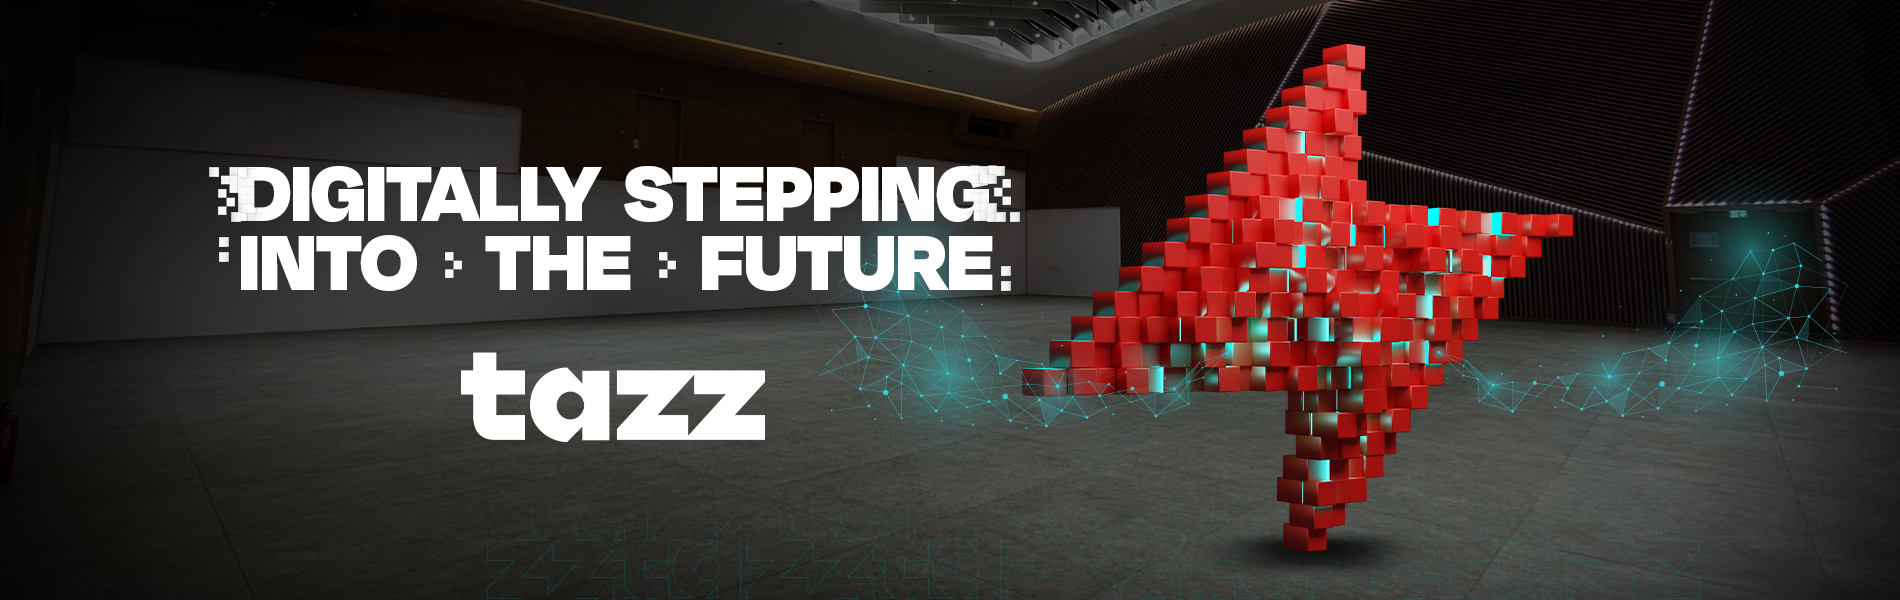 Digitally stepping into the future - tazz